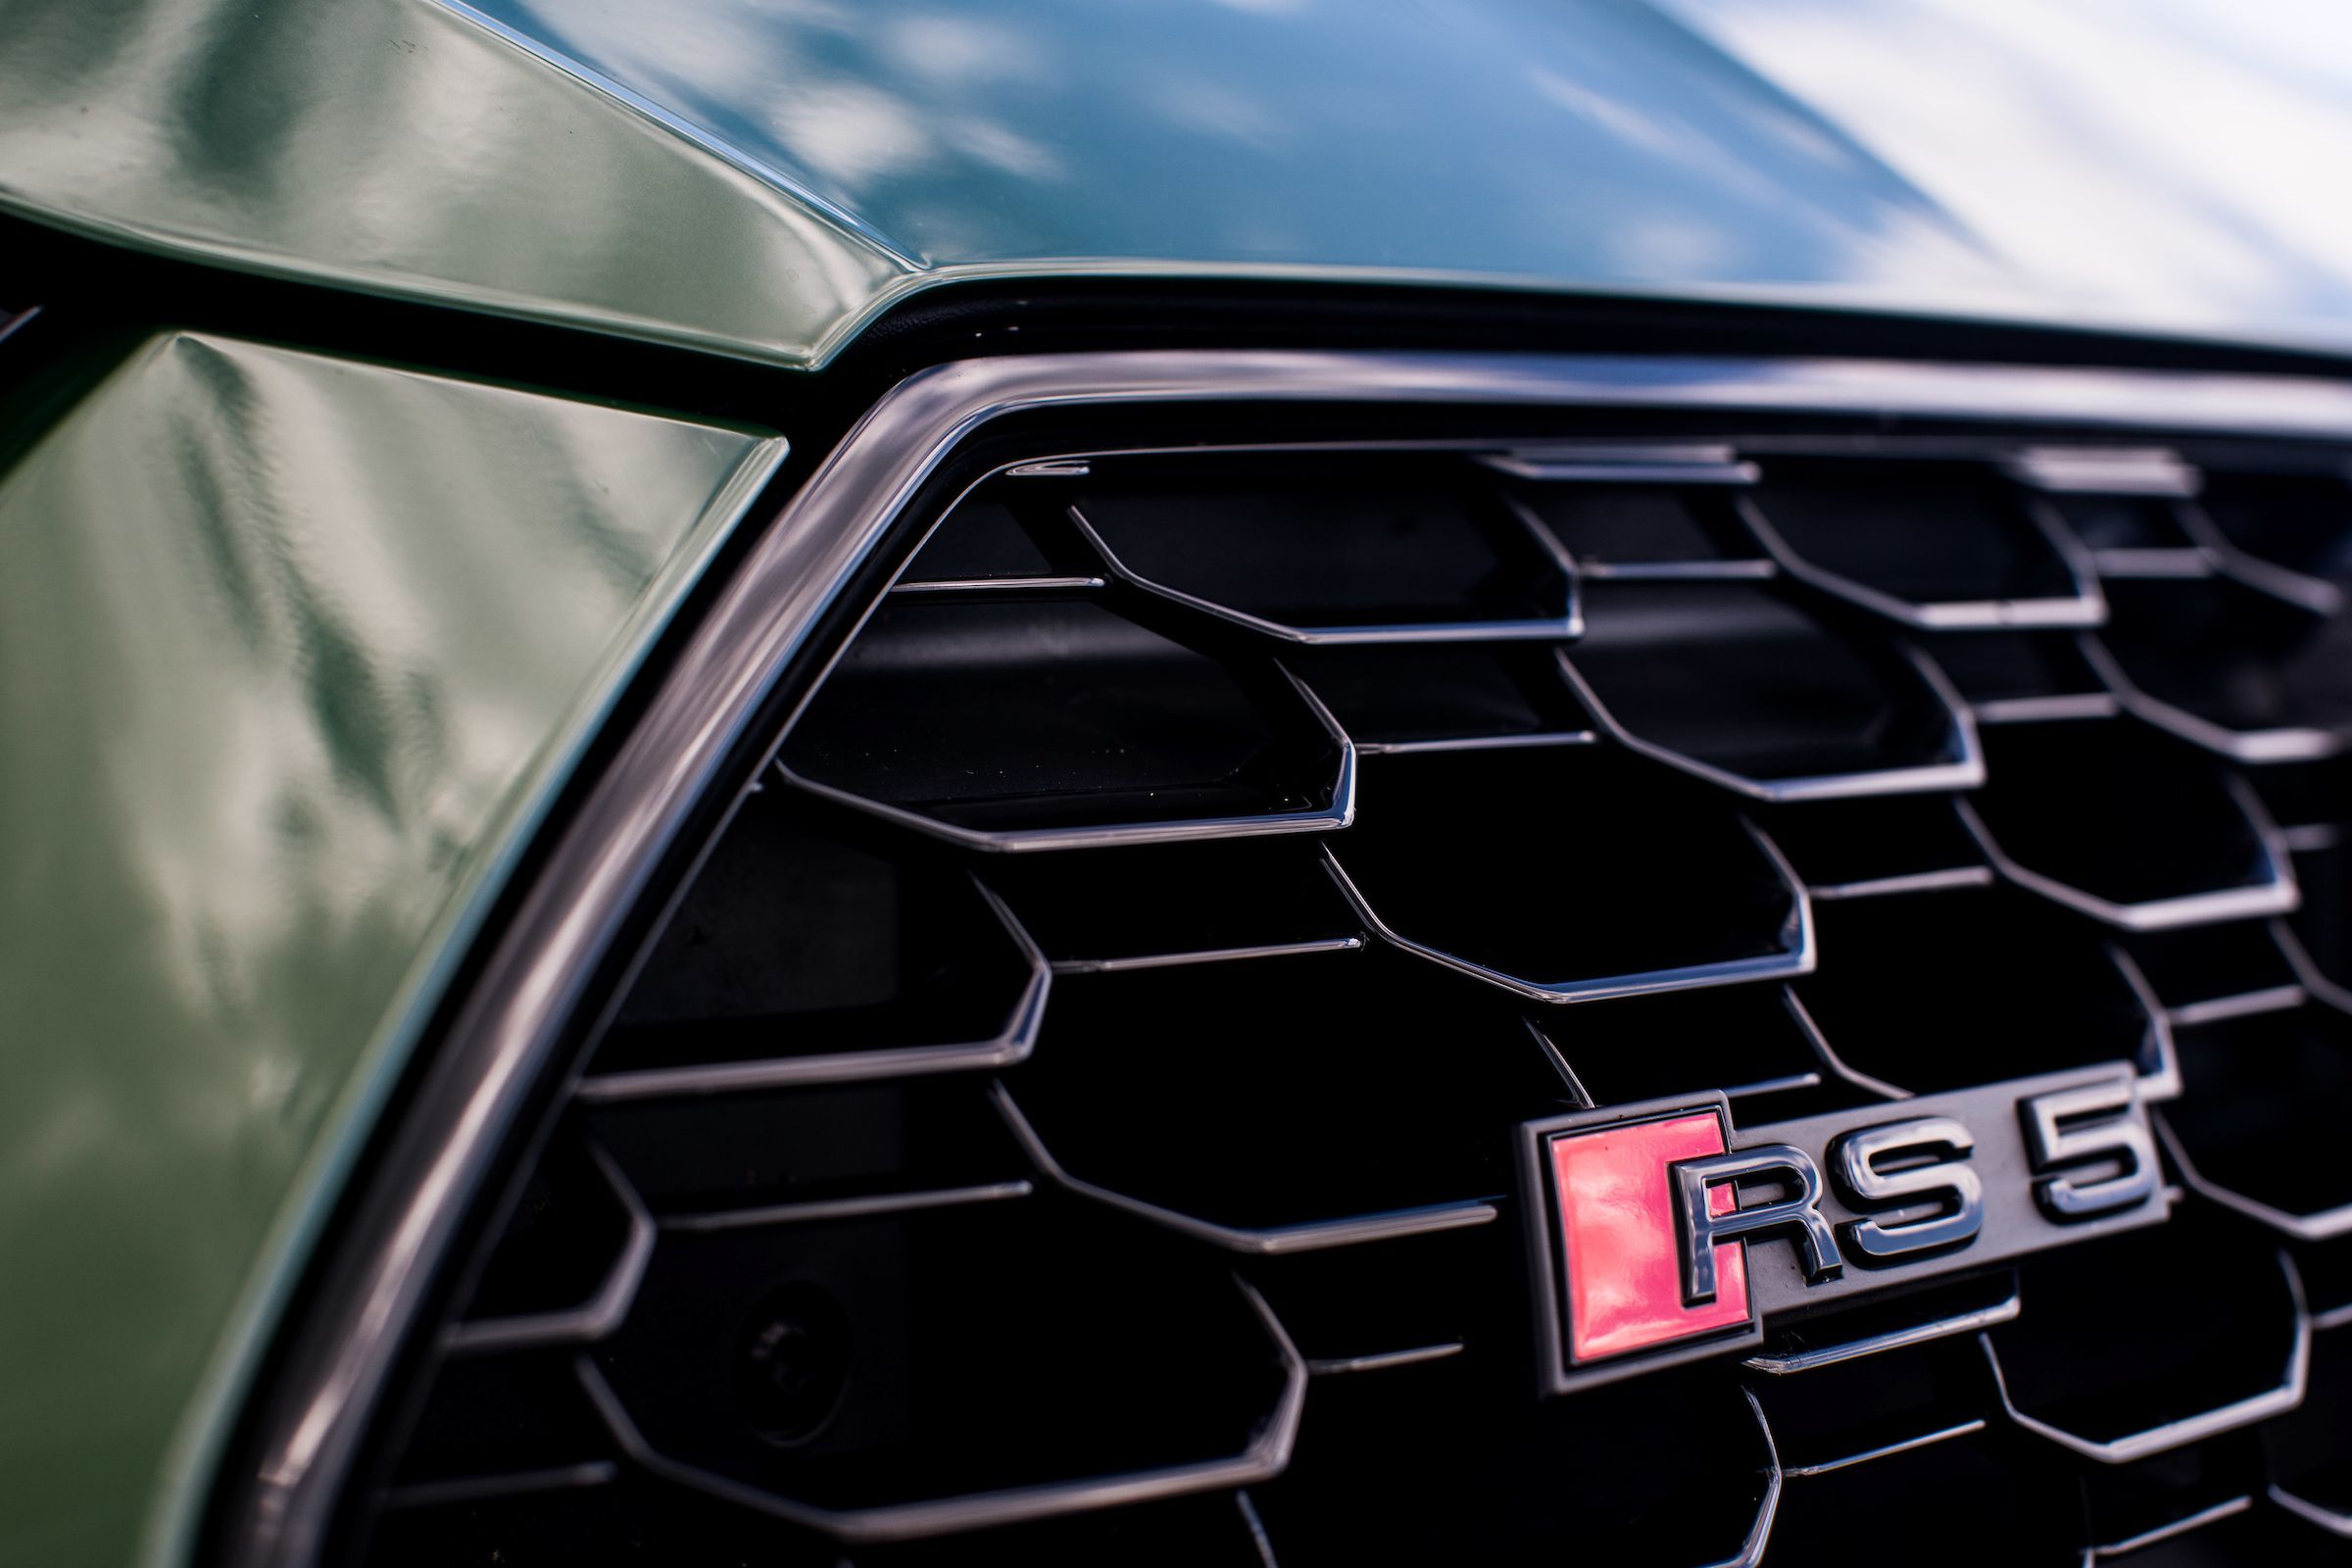 Audi RS5 Sportback, badge on the grille